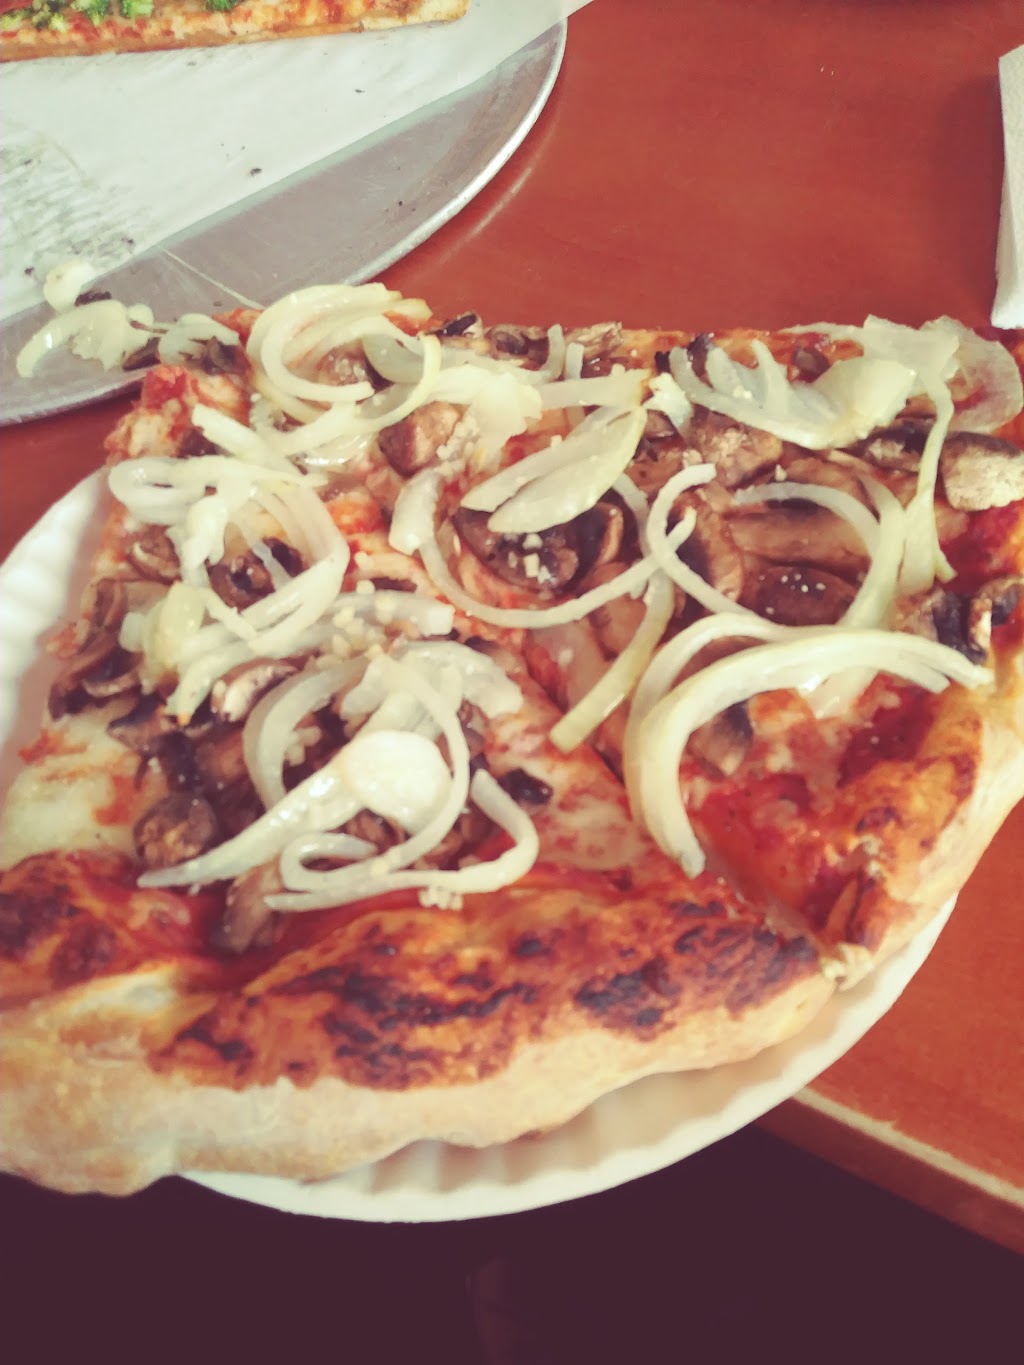 Peters Pizza | 558 Chase Ave, Waterbury, CT 06704 | Phone: (203) 527-6150